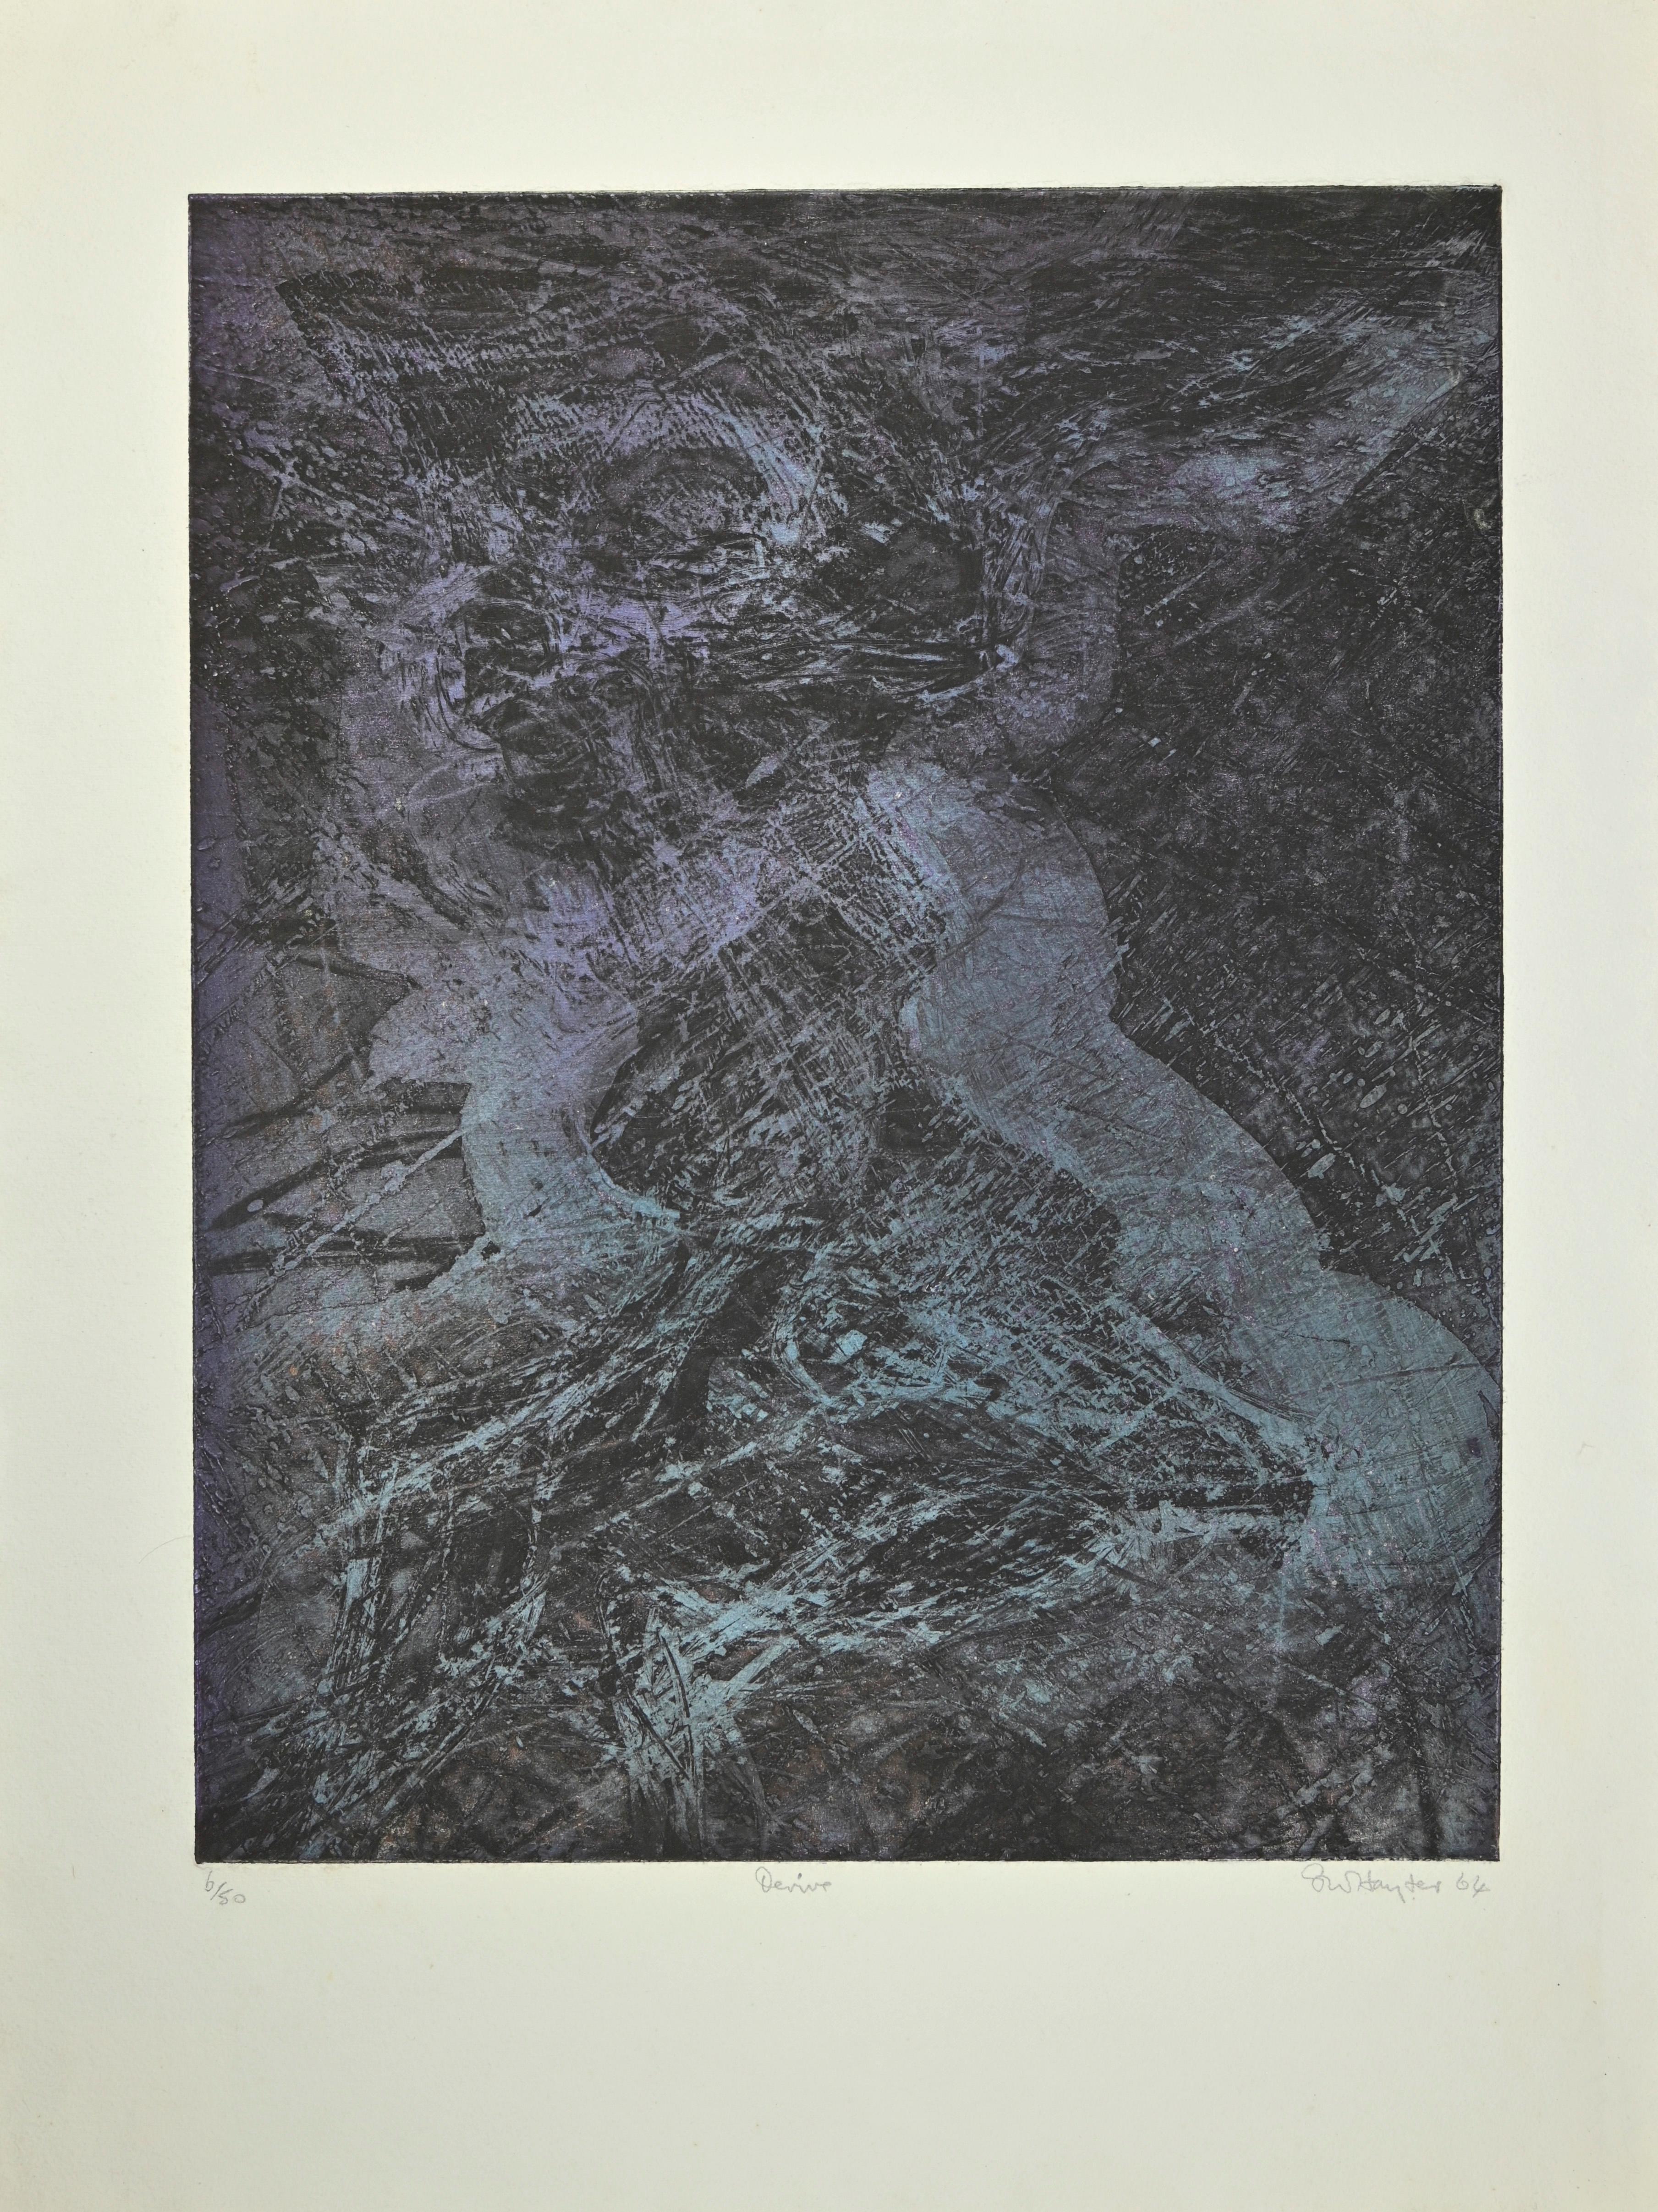 Dèrive is an artwork realized by Stanley William Hayter  in 1964.

Etching  Sheet cm 68x51; image cm 50x39.

Ref. Black and Moorhead, 284.

Hand signed in pencil lower right.

Titled lower center, and numbered lower left.

Edition 6/50. 

Very good